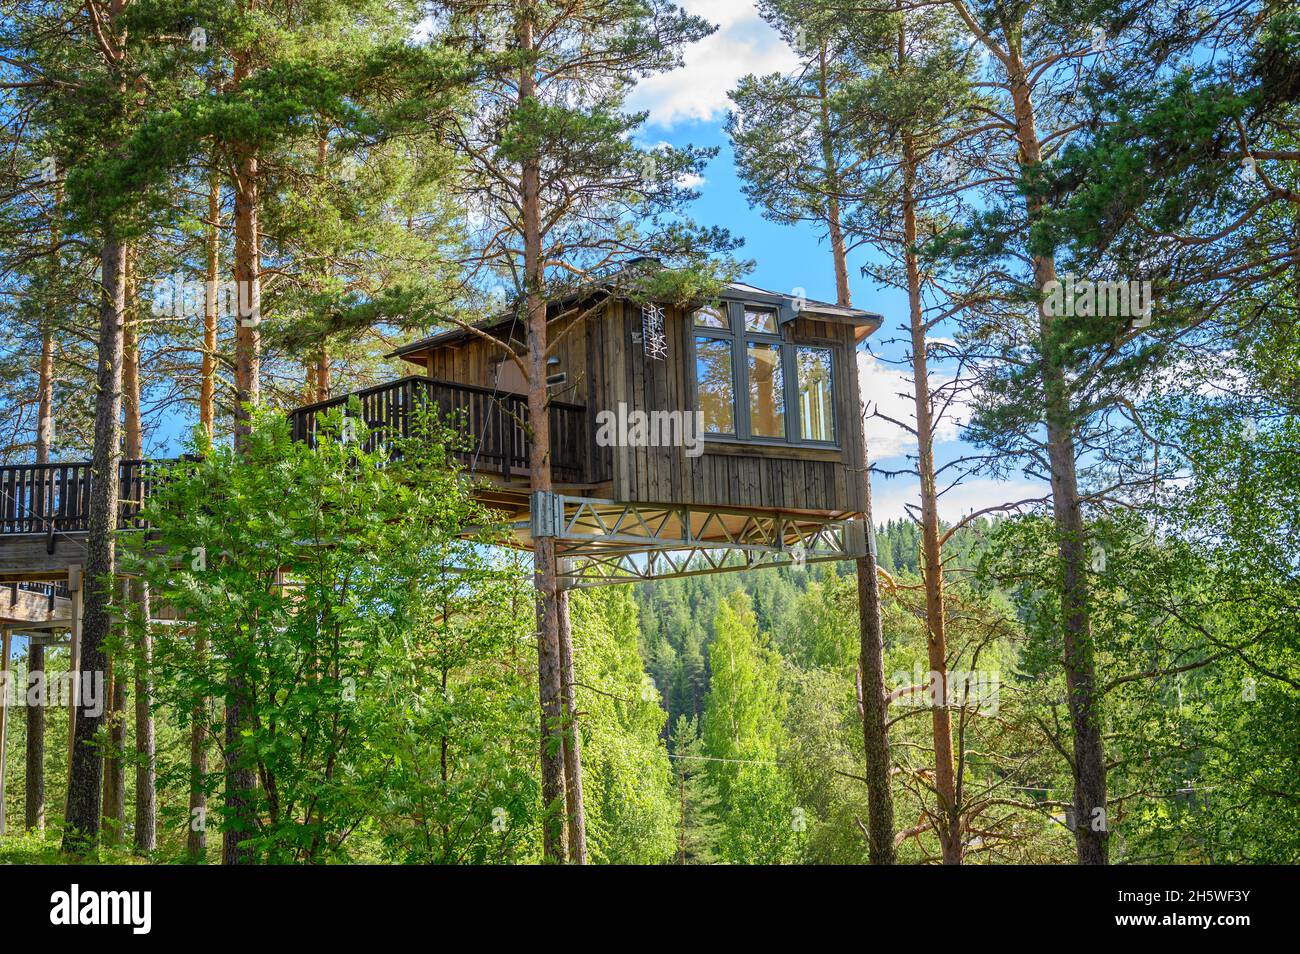 Beautiful outdoor rural wooden structure tree house in the forest based on the pine tree in a green summer wonderland in europe Stock Photo